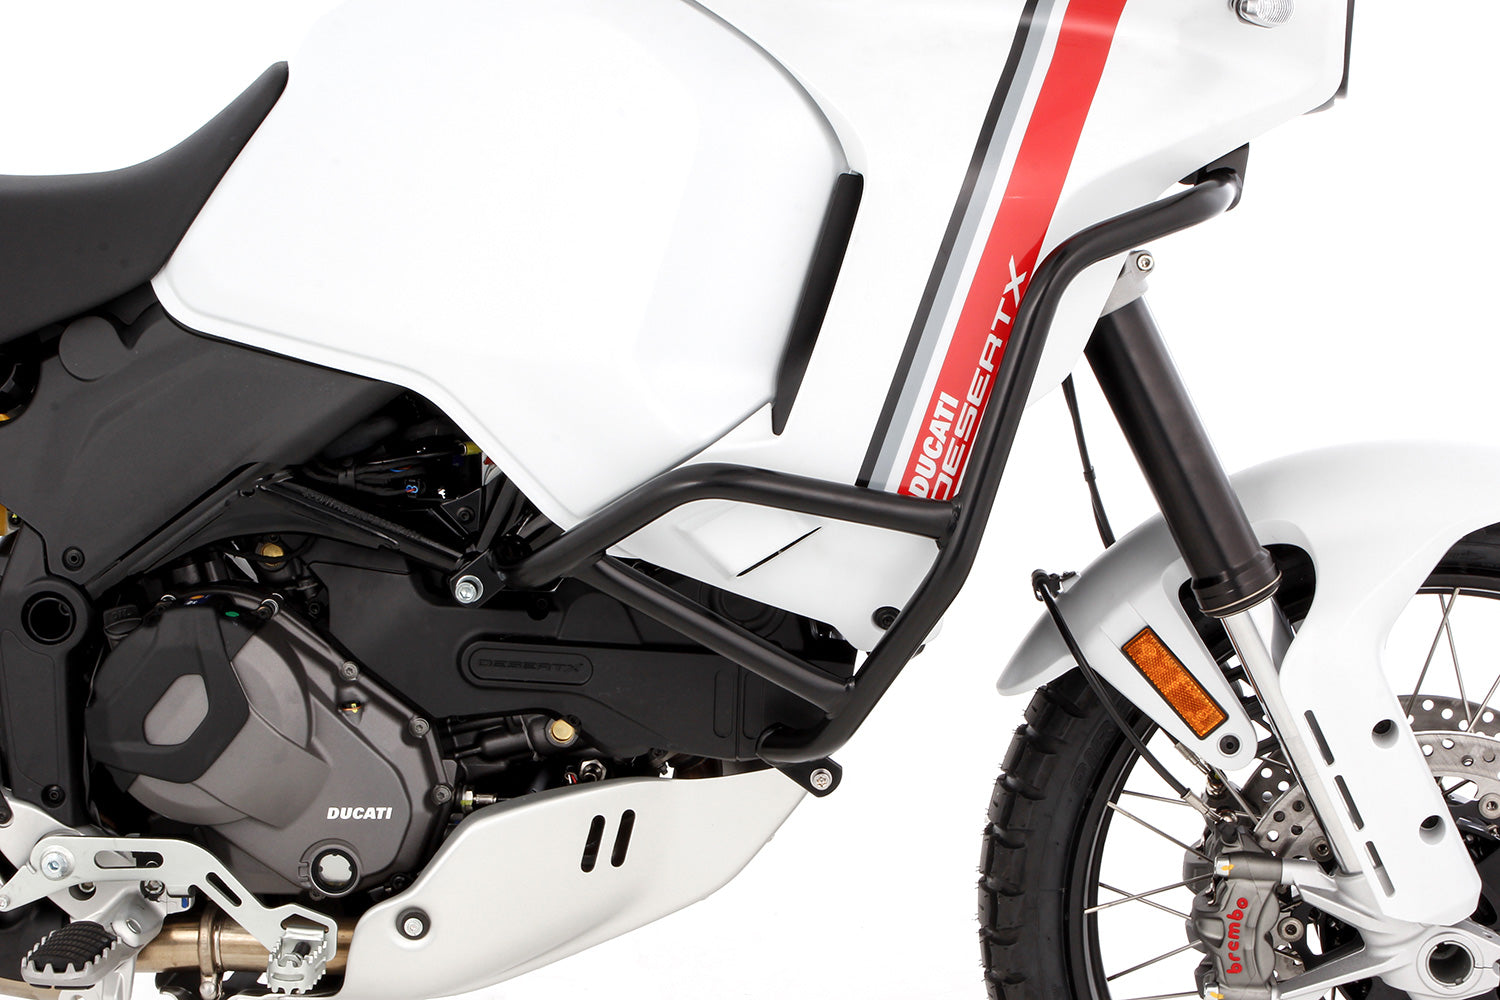 Wunderlich fairing protection bar - black - For models with Standard engine protection